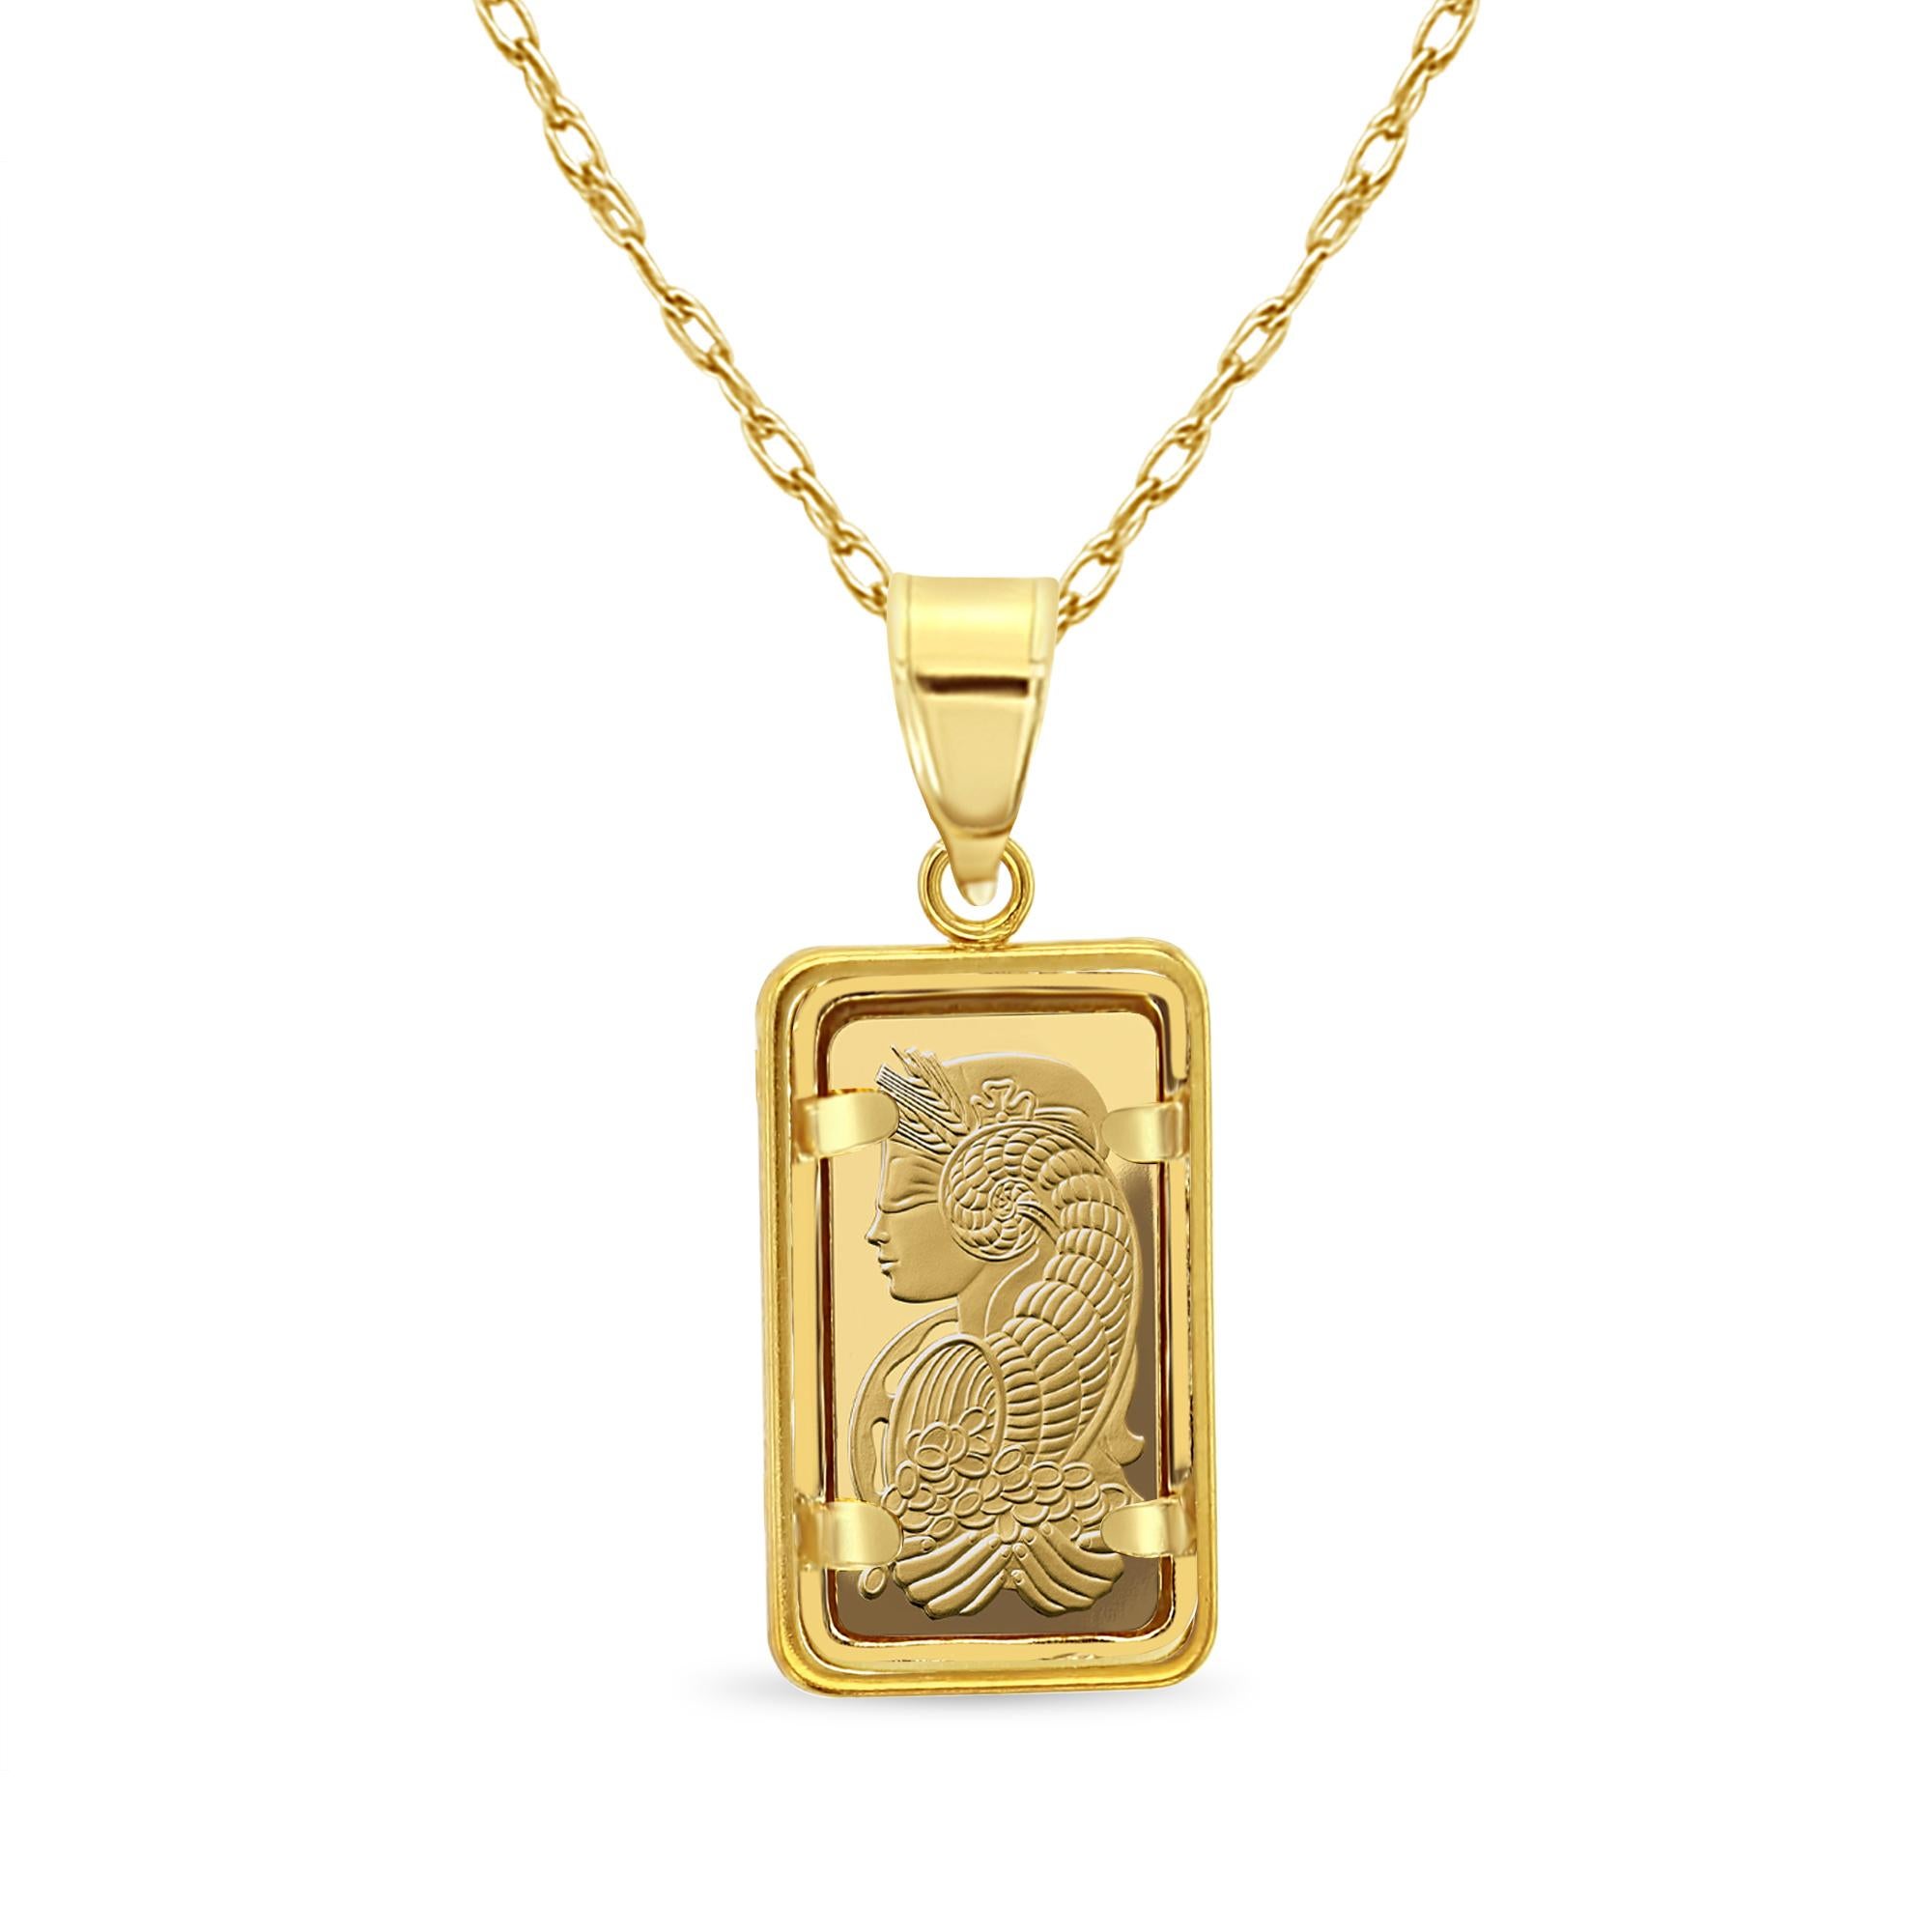 **MADE TO ORDER**

♥ Coin Information ♥
Country: Switzerland
Details: 1 Gram Credit Suisse Gold Bar
Purity: .999
Metal Weight: .03215 Troy Ounce
Obverse & Reverse: Varies based on availability
Design: PAMP Suisse or Similar gold bar

♥ Bezel